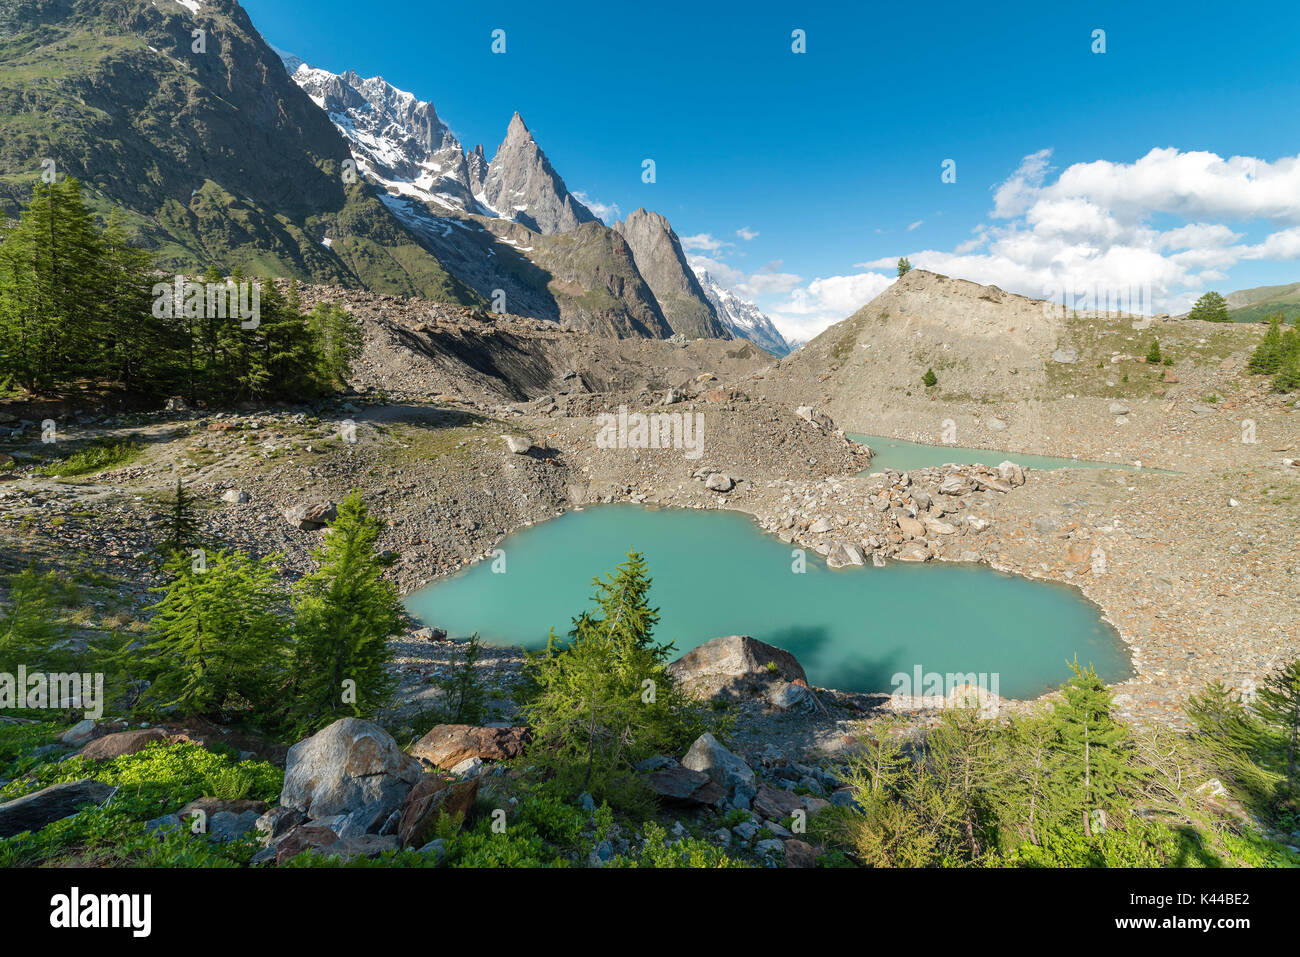 Miage lake at Veny valley, in the background the Aiguille Noire de Peteurey, Mont Blanc massif, Aosta province, Italy, Europe. Stock Photo